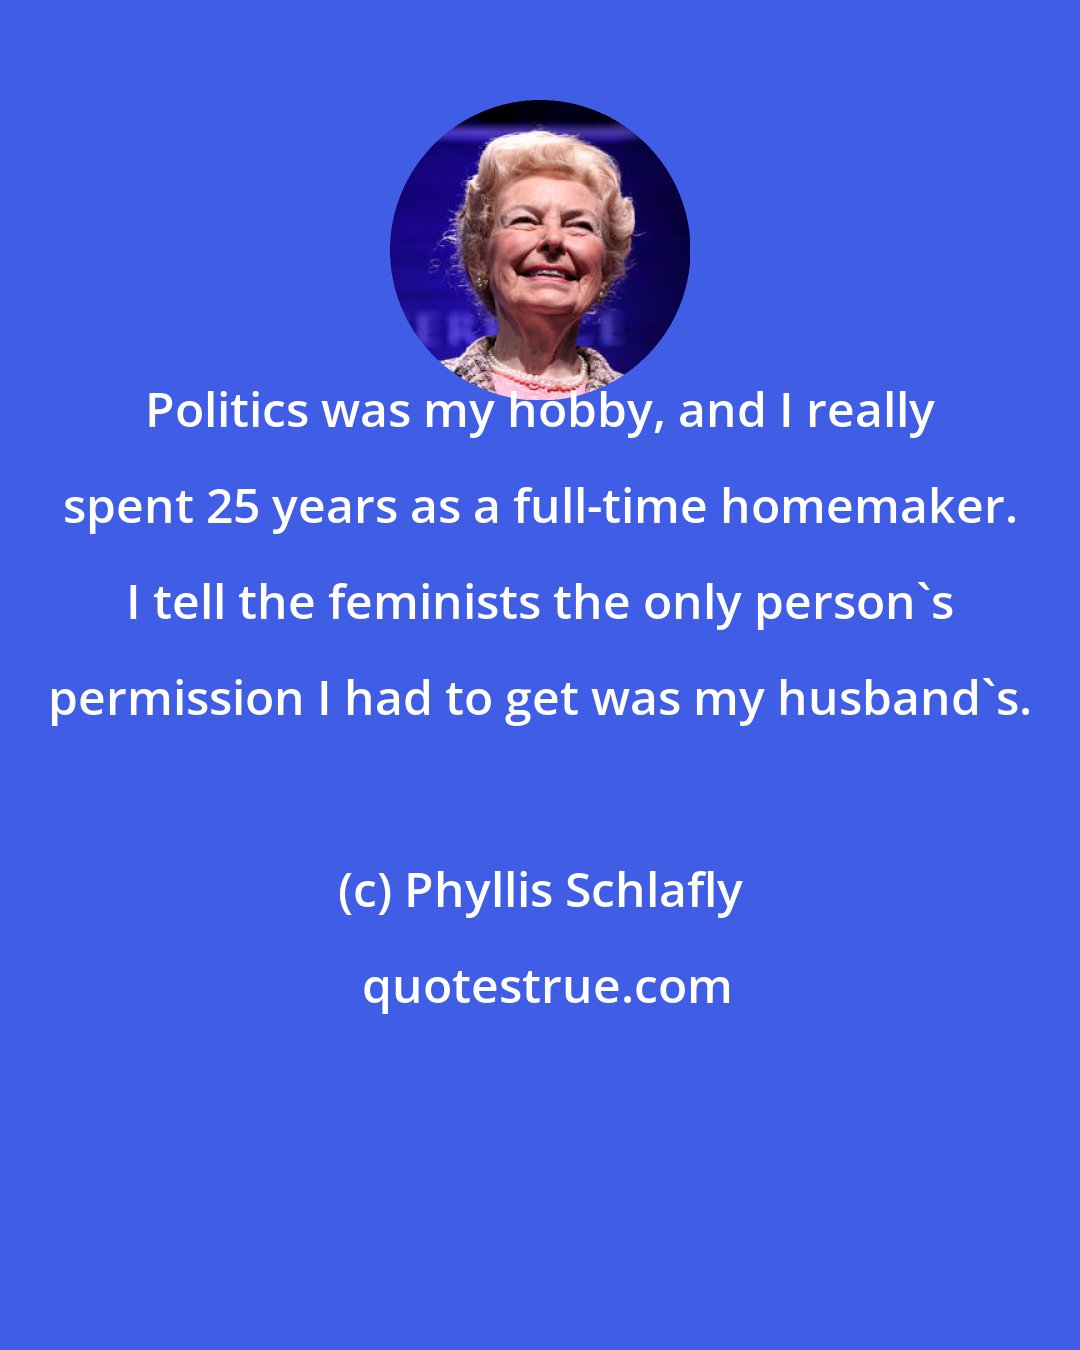 Phyllis Schlafly: Politics was my hobby, and I really spent 25 years as a full-time homemaker. I tell the feminists the only person's permission I had to get was my husband's.